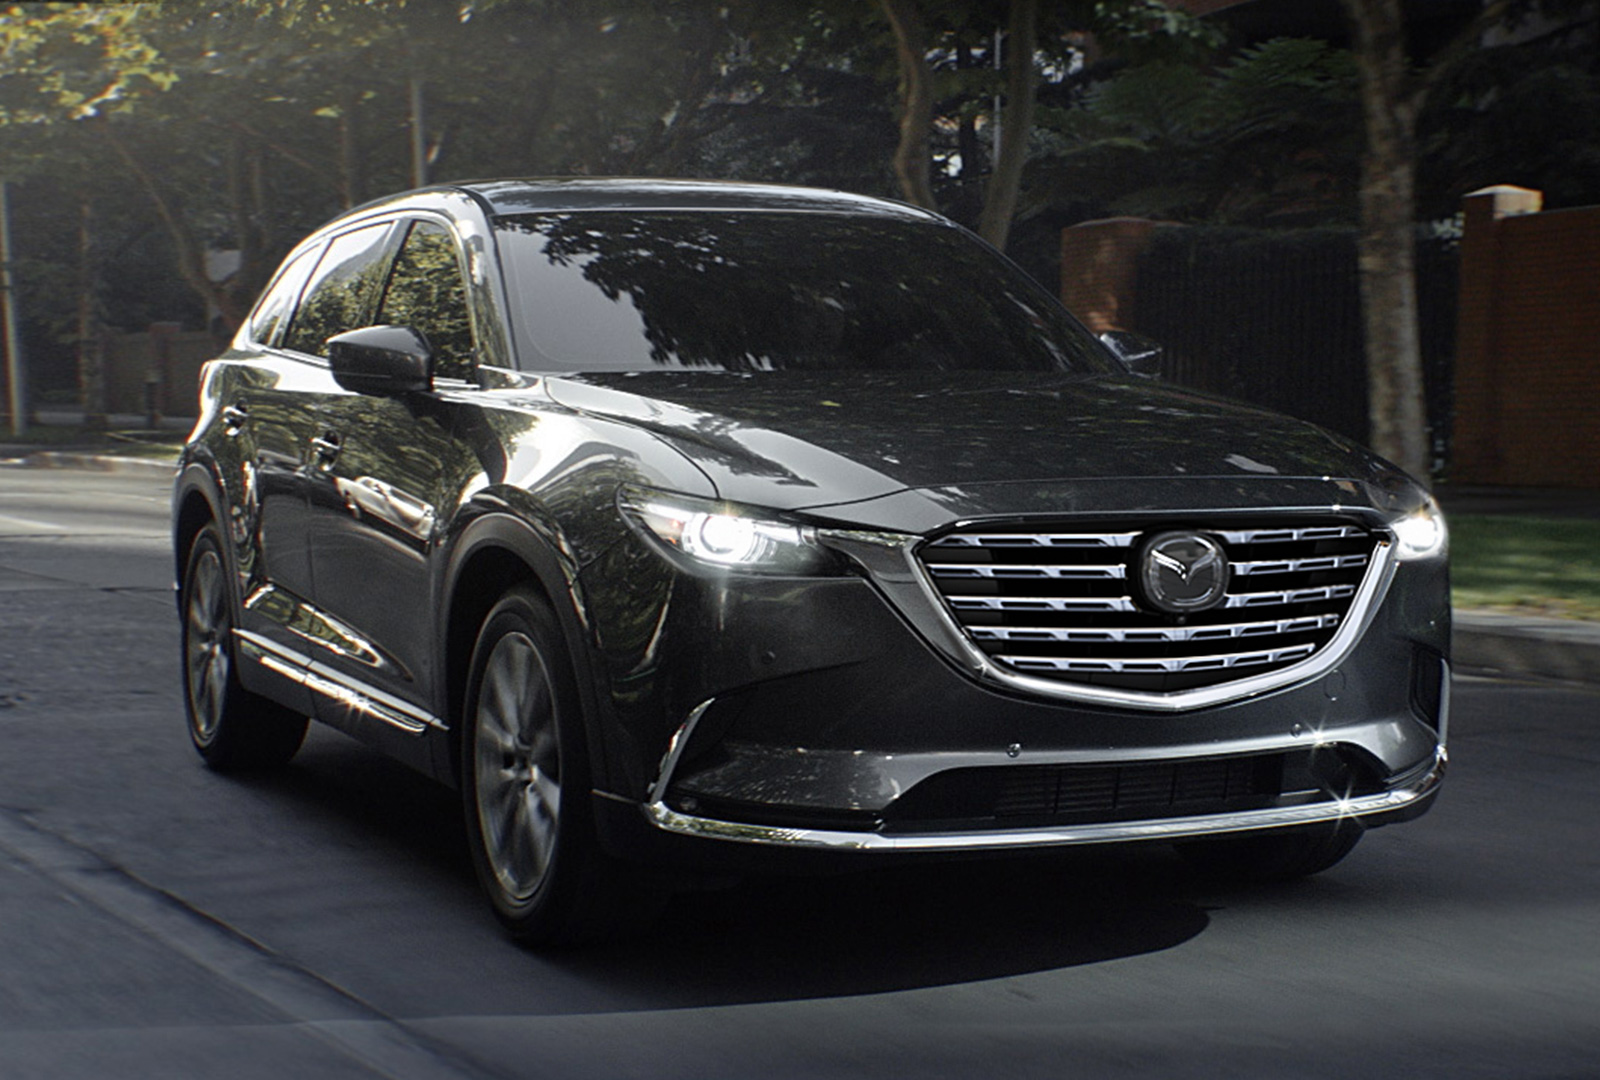 Mazda CX-9 approaches with headlights on